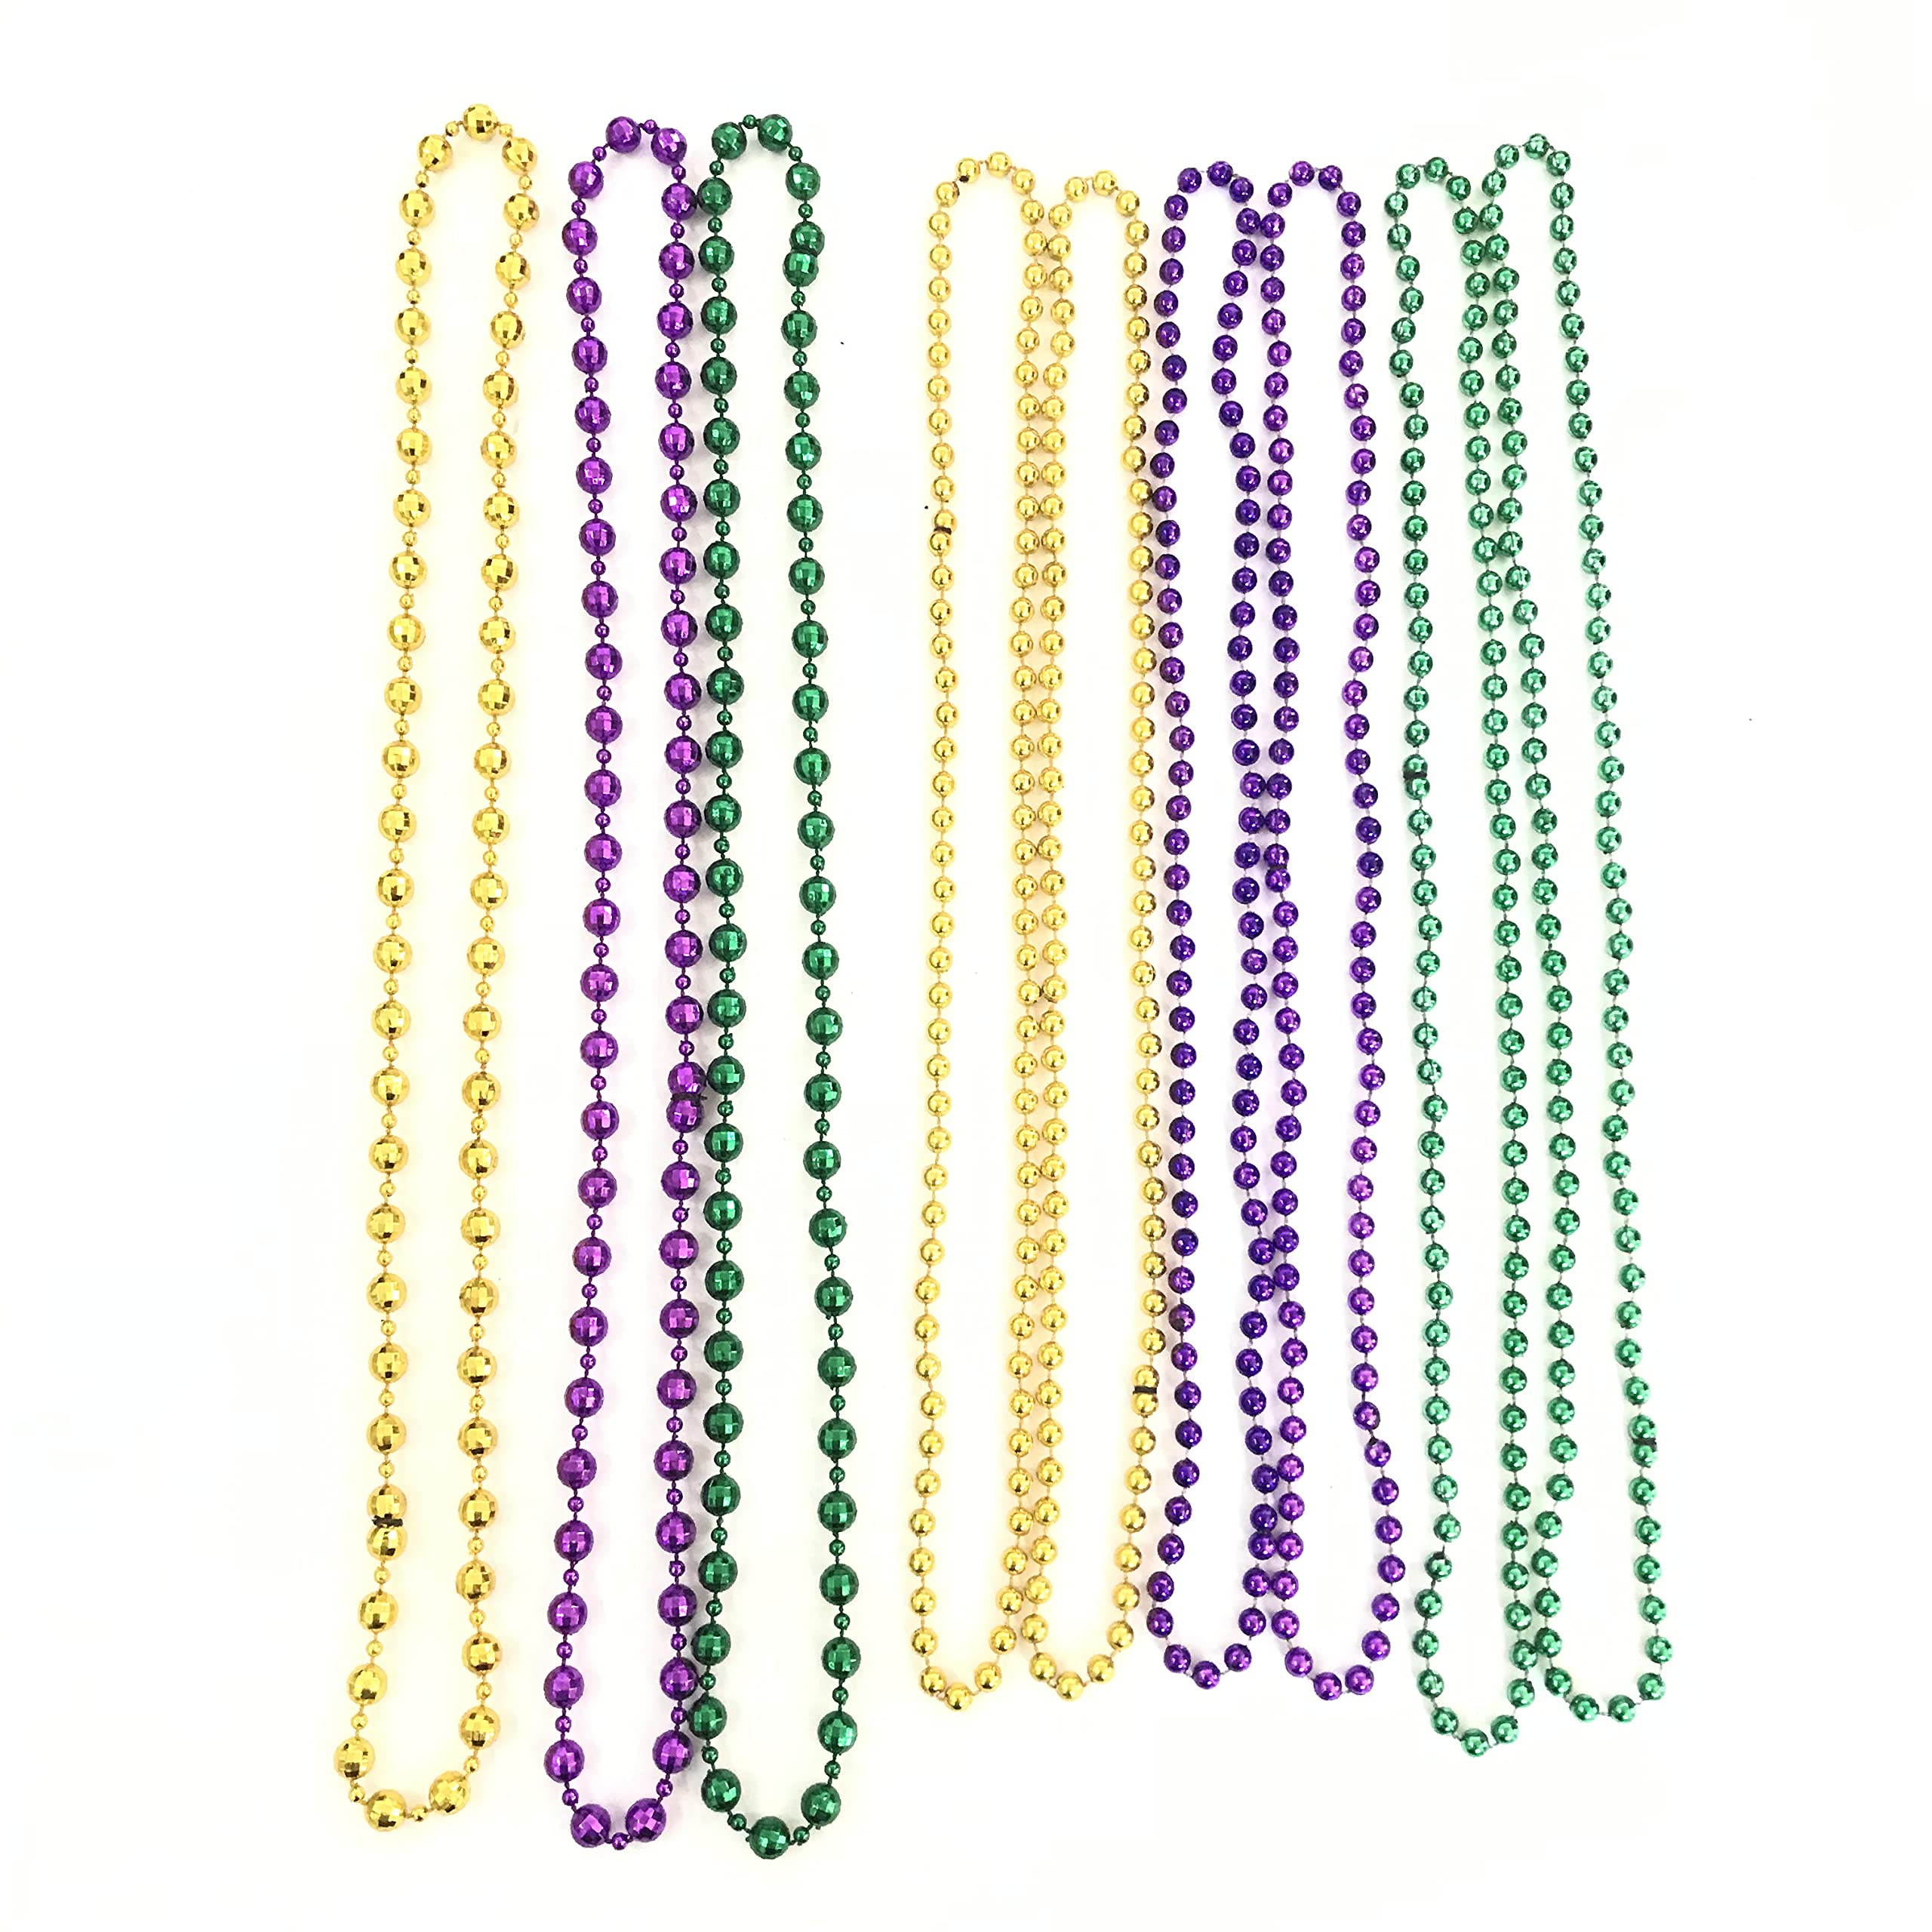 33 Inch 7 mm Metallic Purple Bead Necklaces, 6pcs Mardi Gras Beads Bulk  Round Beaded Necklaces Costume Necklace for Mardi Gras Party Christmas  Festive Events, Party Favors 